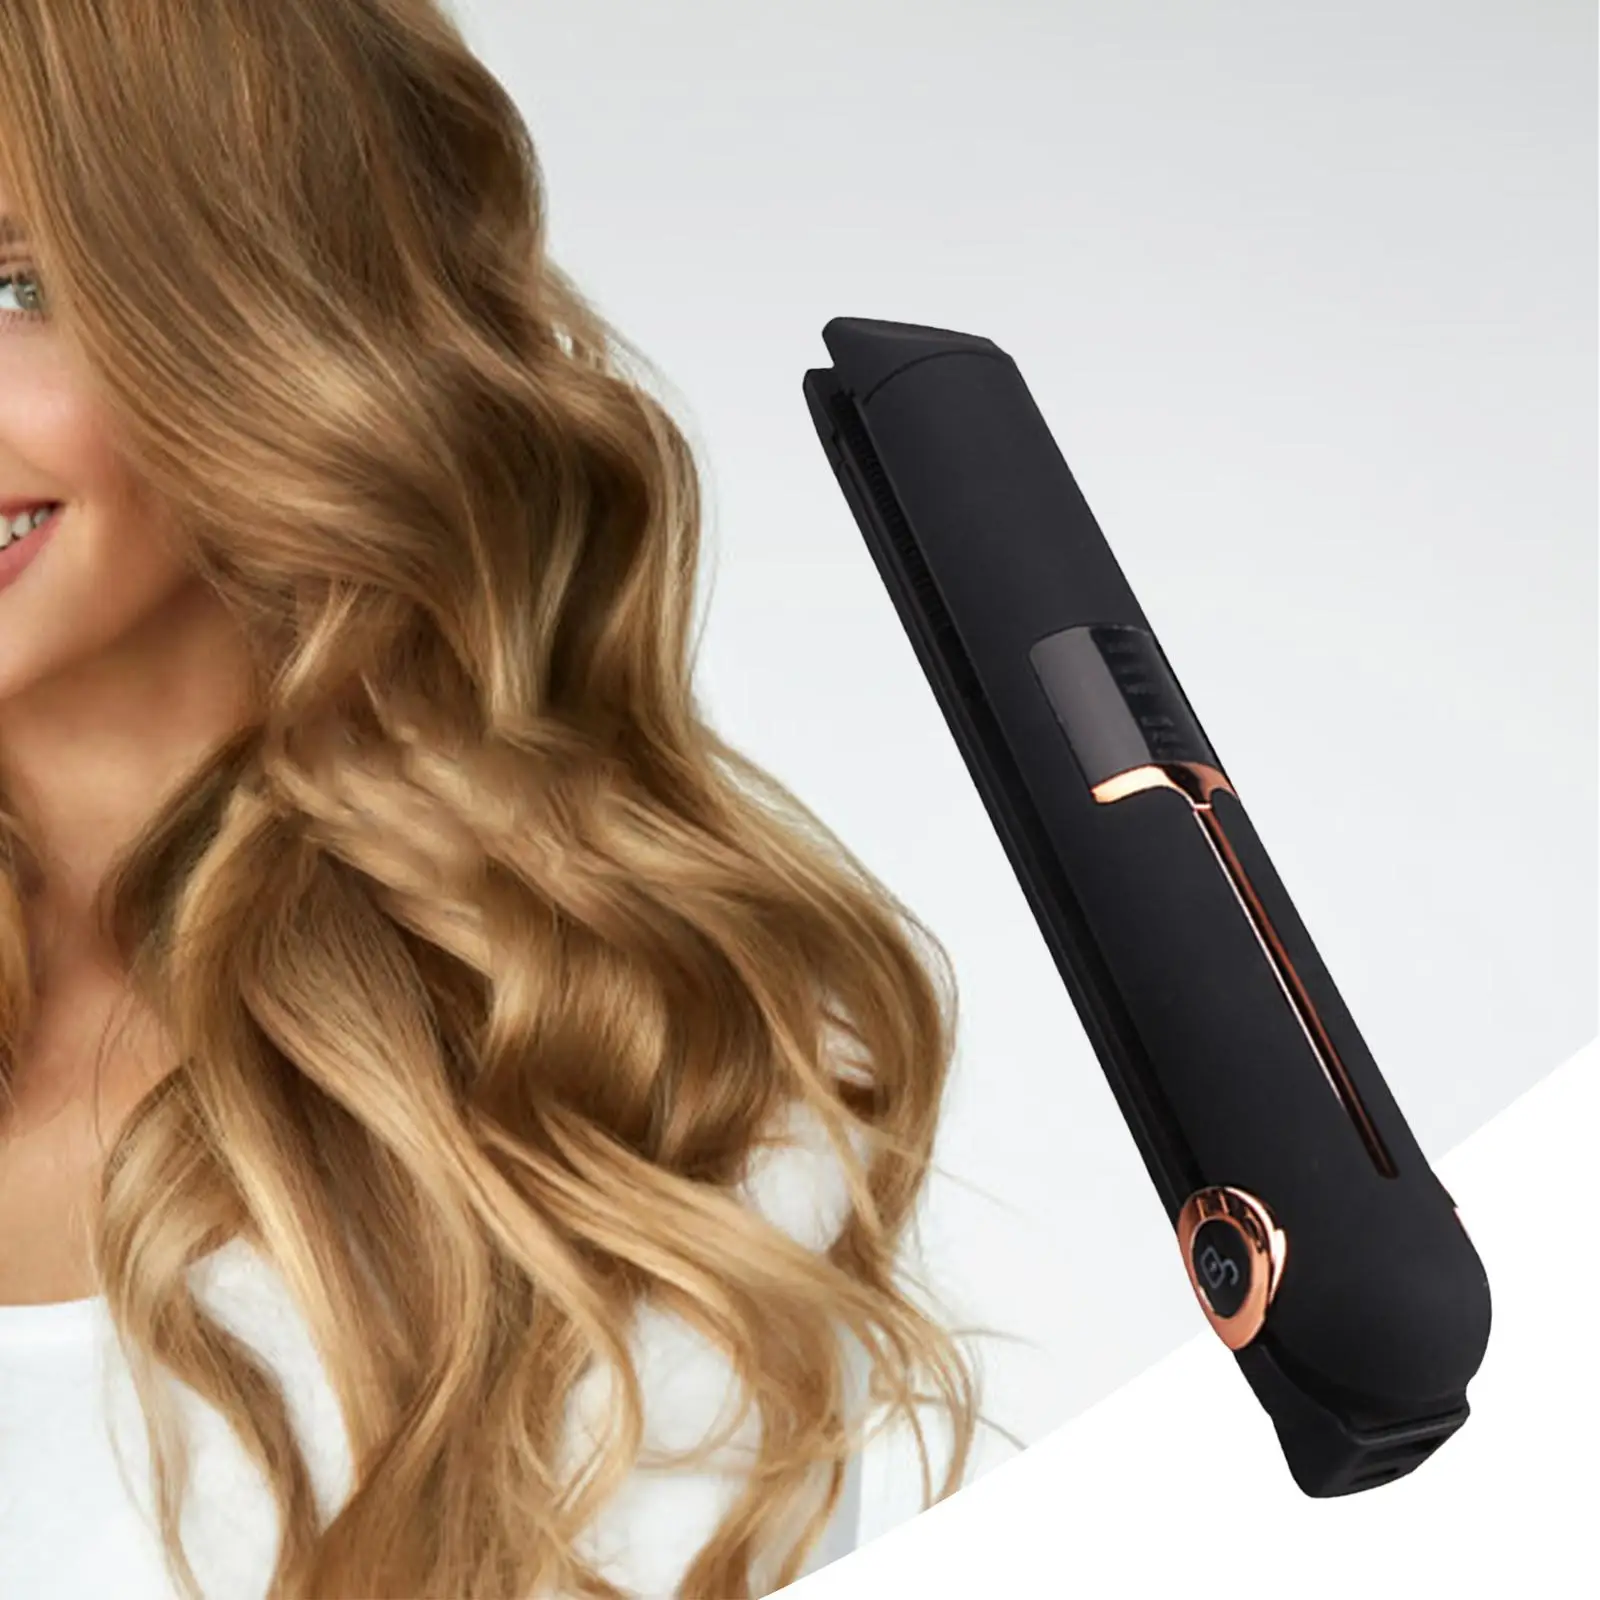 Compact Cordless Hair Curler Straightener 3-Level Temp Automatic USB Charging Power Bank for Salon Hair Straightening Curls DIY